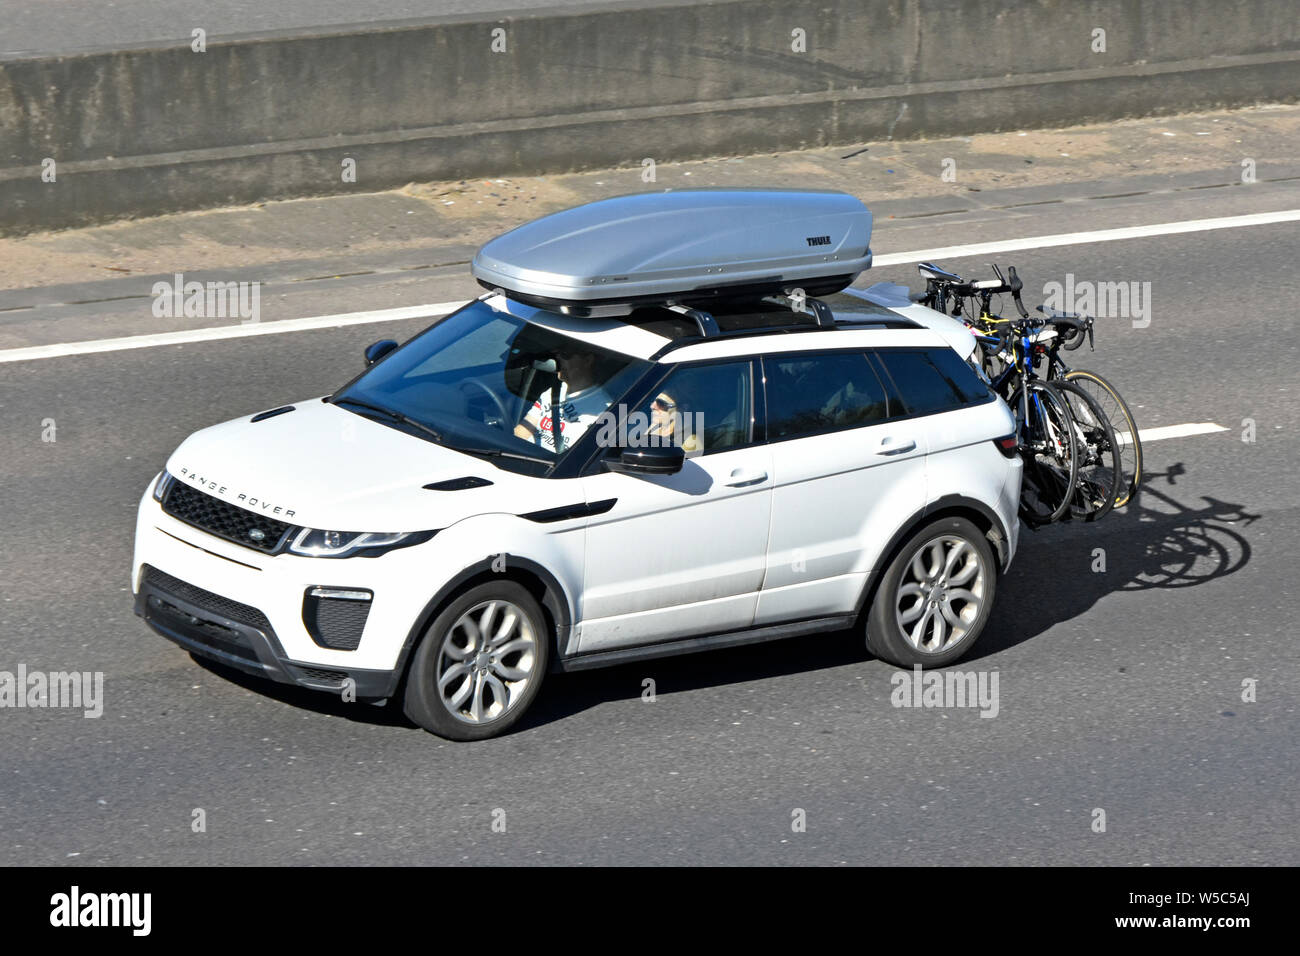 White Range Rover car view from above looking down on roof box & rear mounted bike cycle rack on m25 motorway concrete crash barrier beyond England UK Stock Photo